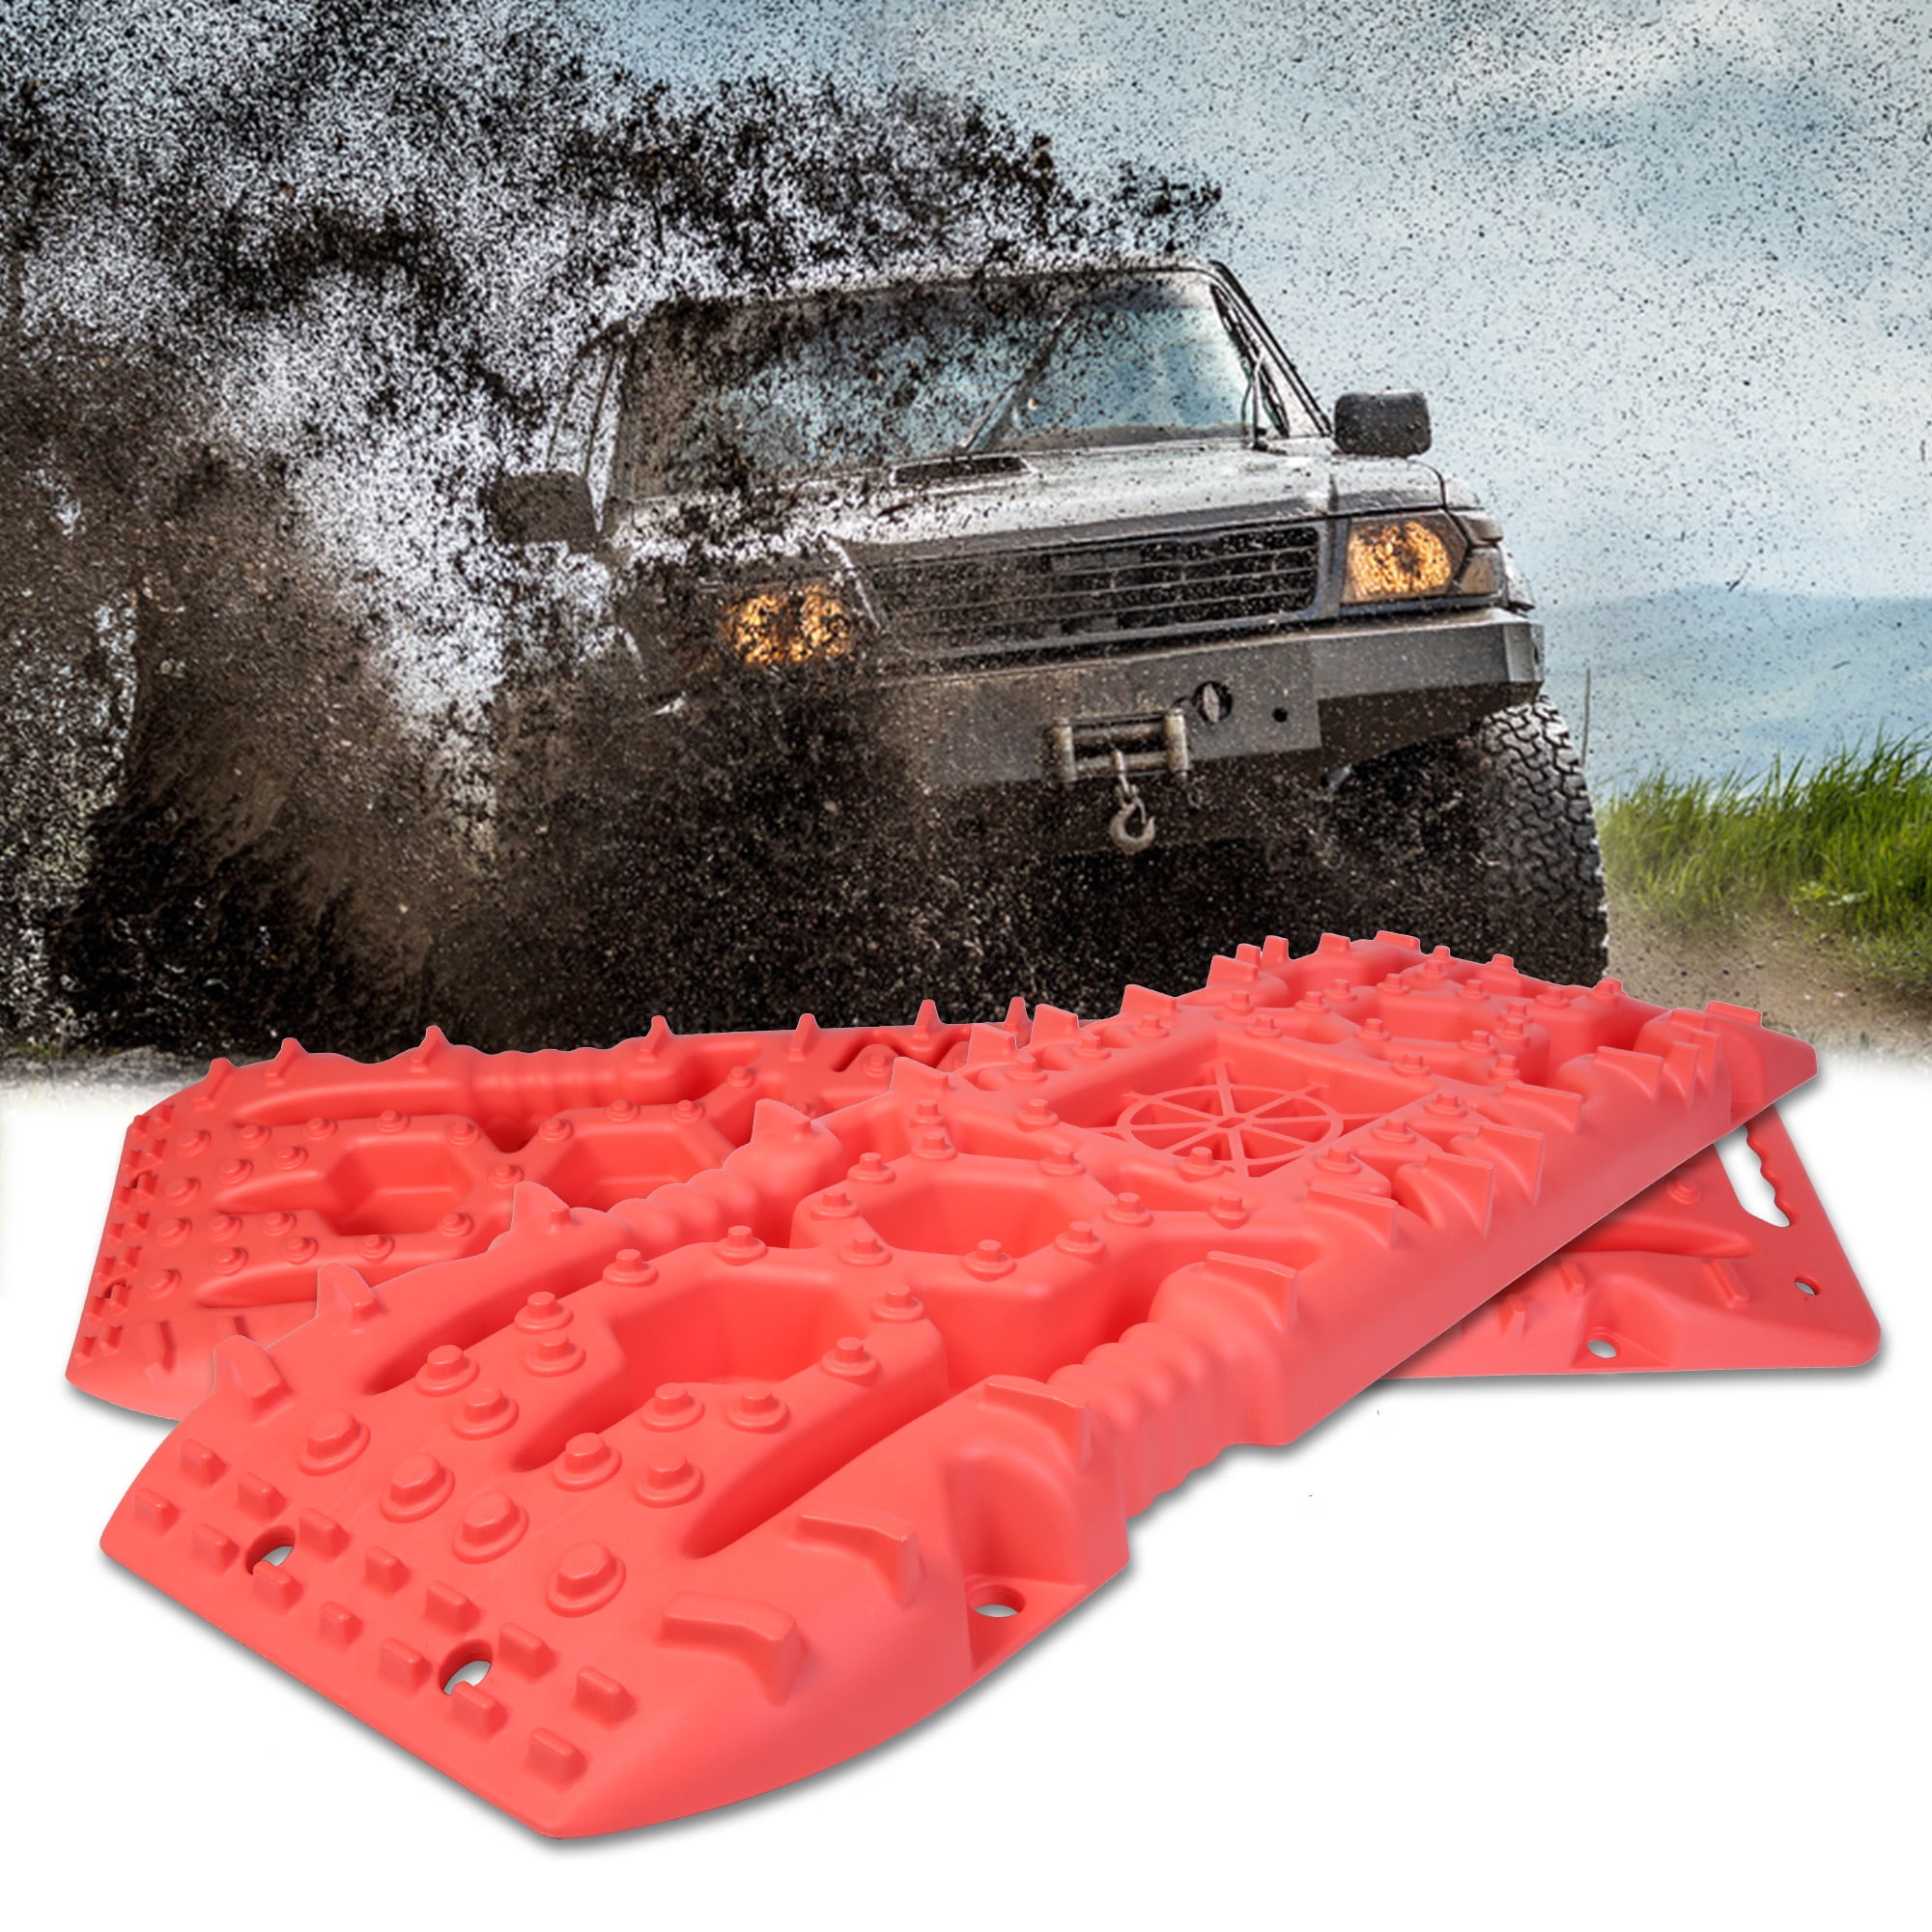 2 Pc 12 x 33 Explorer Off Road Recovery Tracks Mats For Snow Mud And Sand Traction 